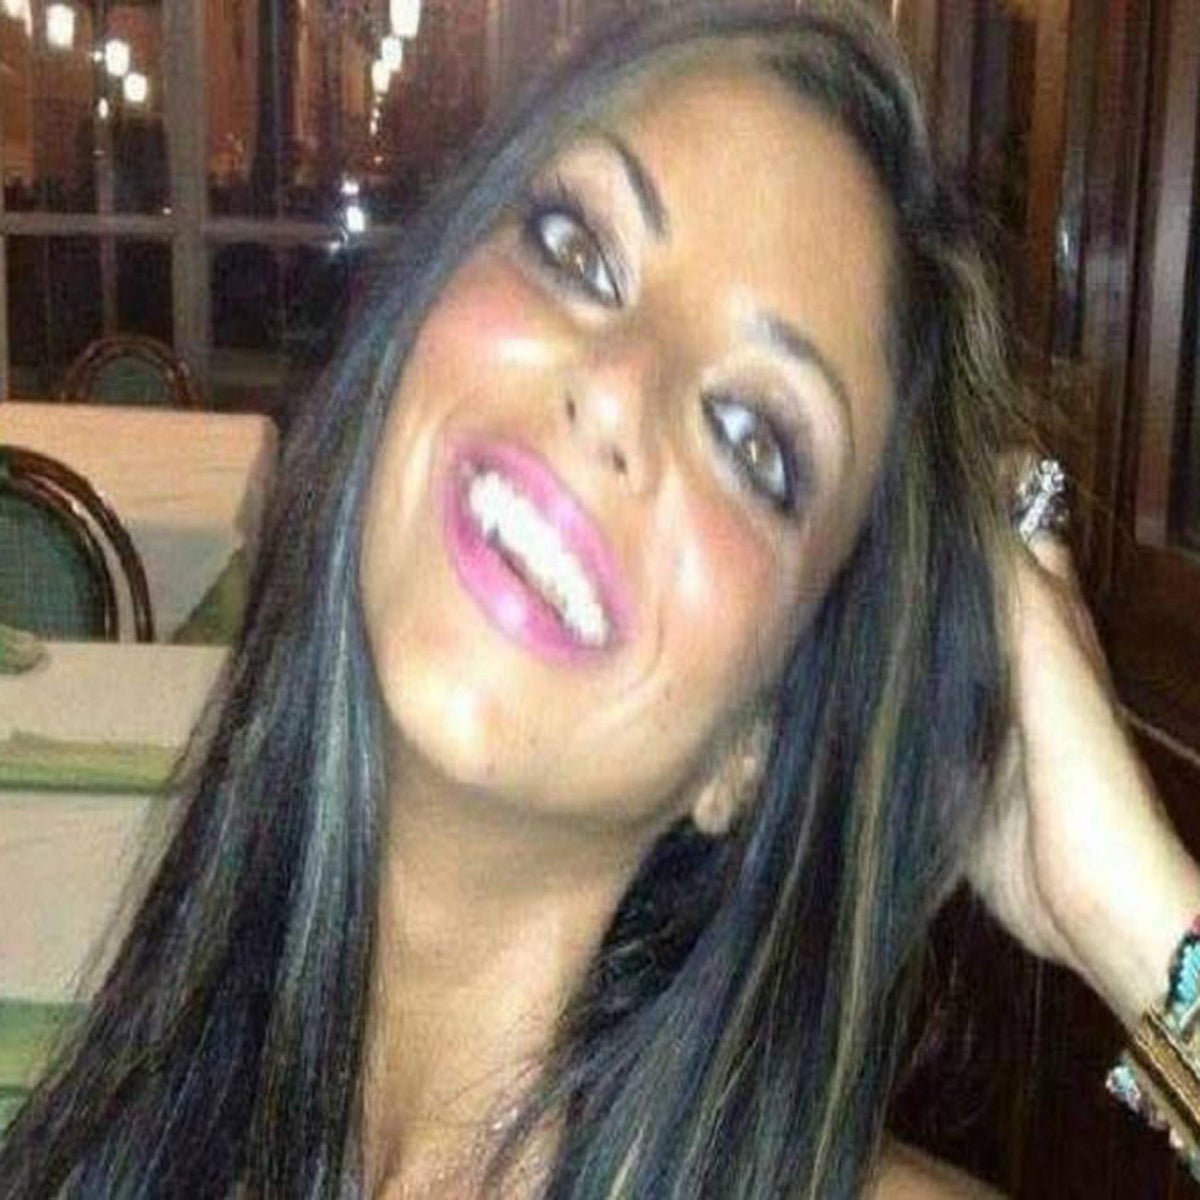 Italian Straight Male Porn Stars Top - Investigation launched into death of Italian woman who killed herself after  explicit images went viral | The Independent | The Independent